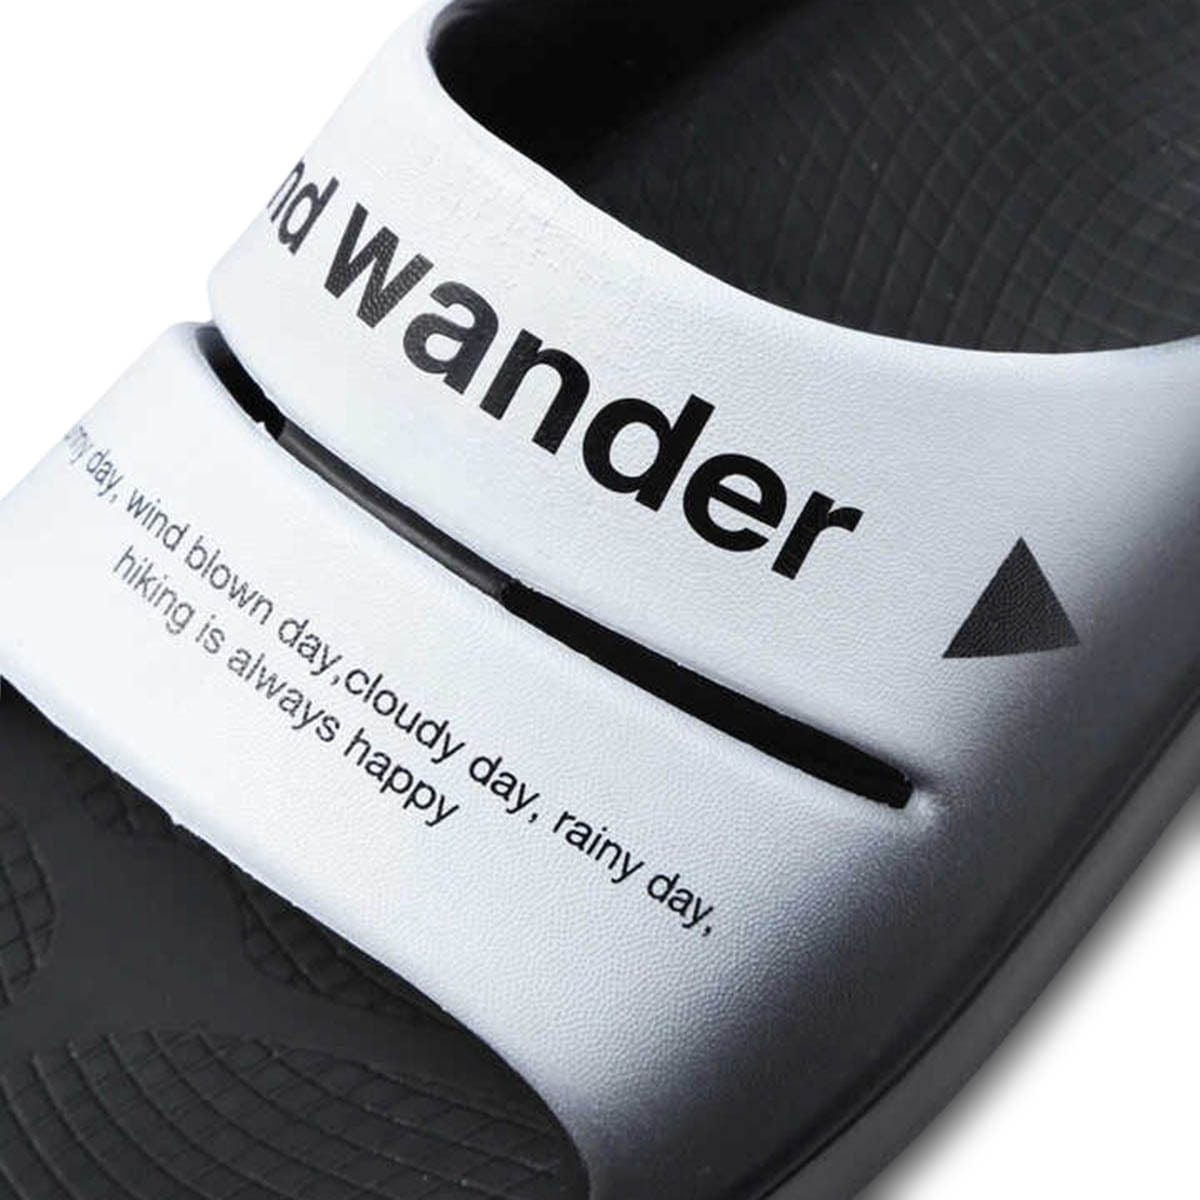 and wander Sandals X OOFOS AHH RECOVERY SANDLE